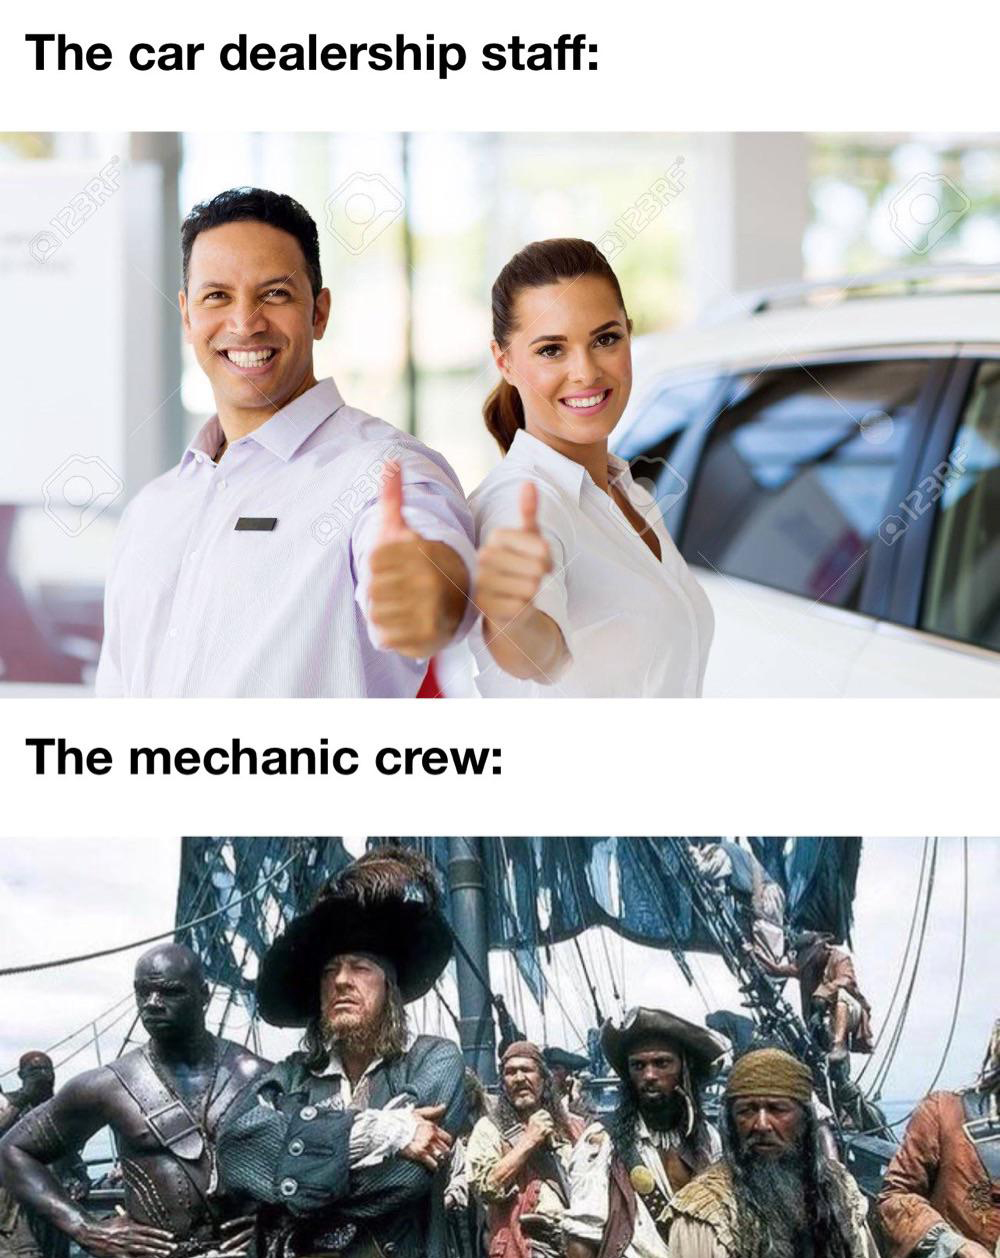 pirates of the caribbean crew - The car dealership staff The mechanic crew